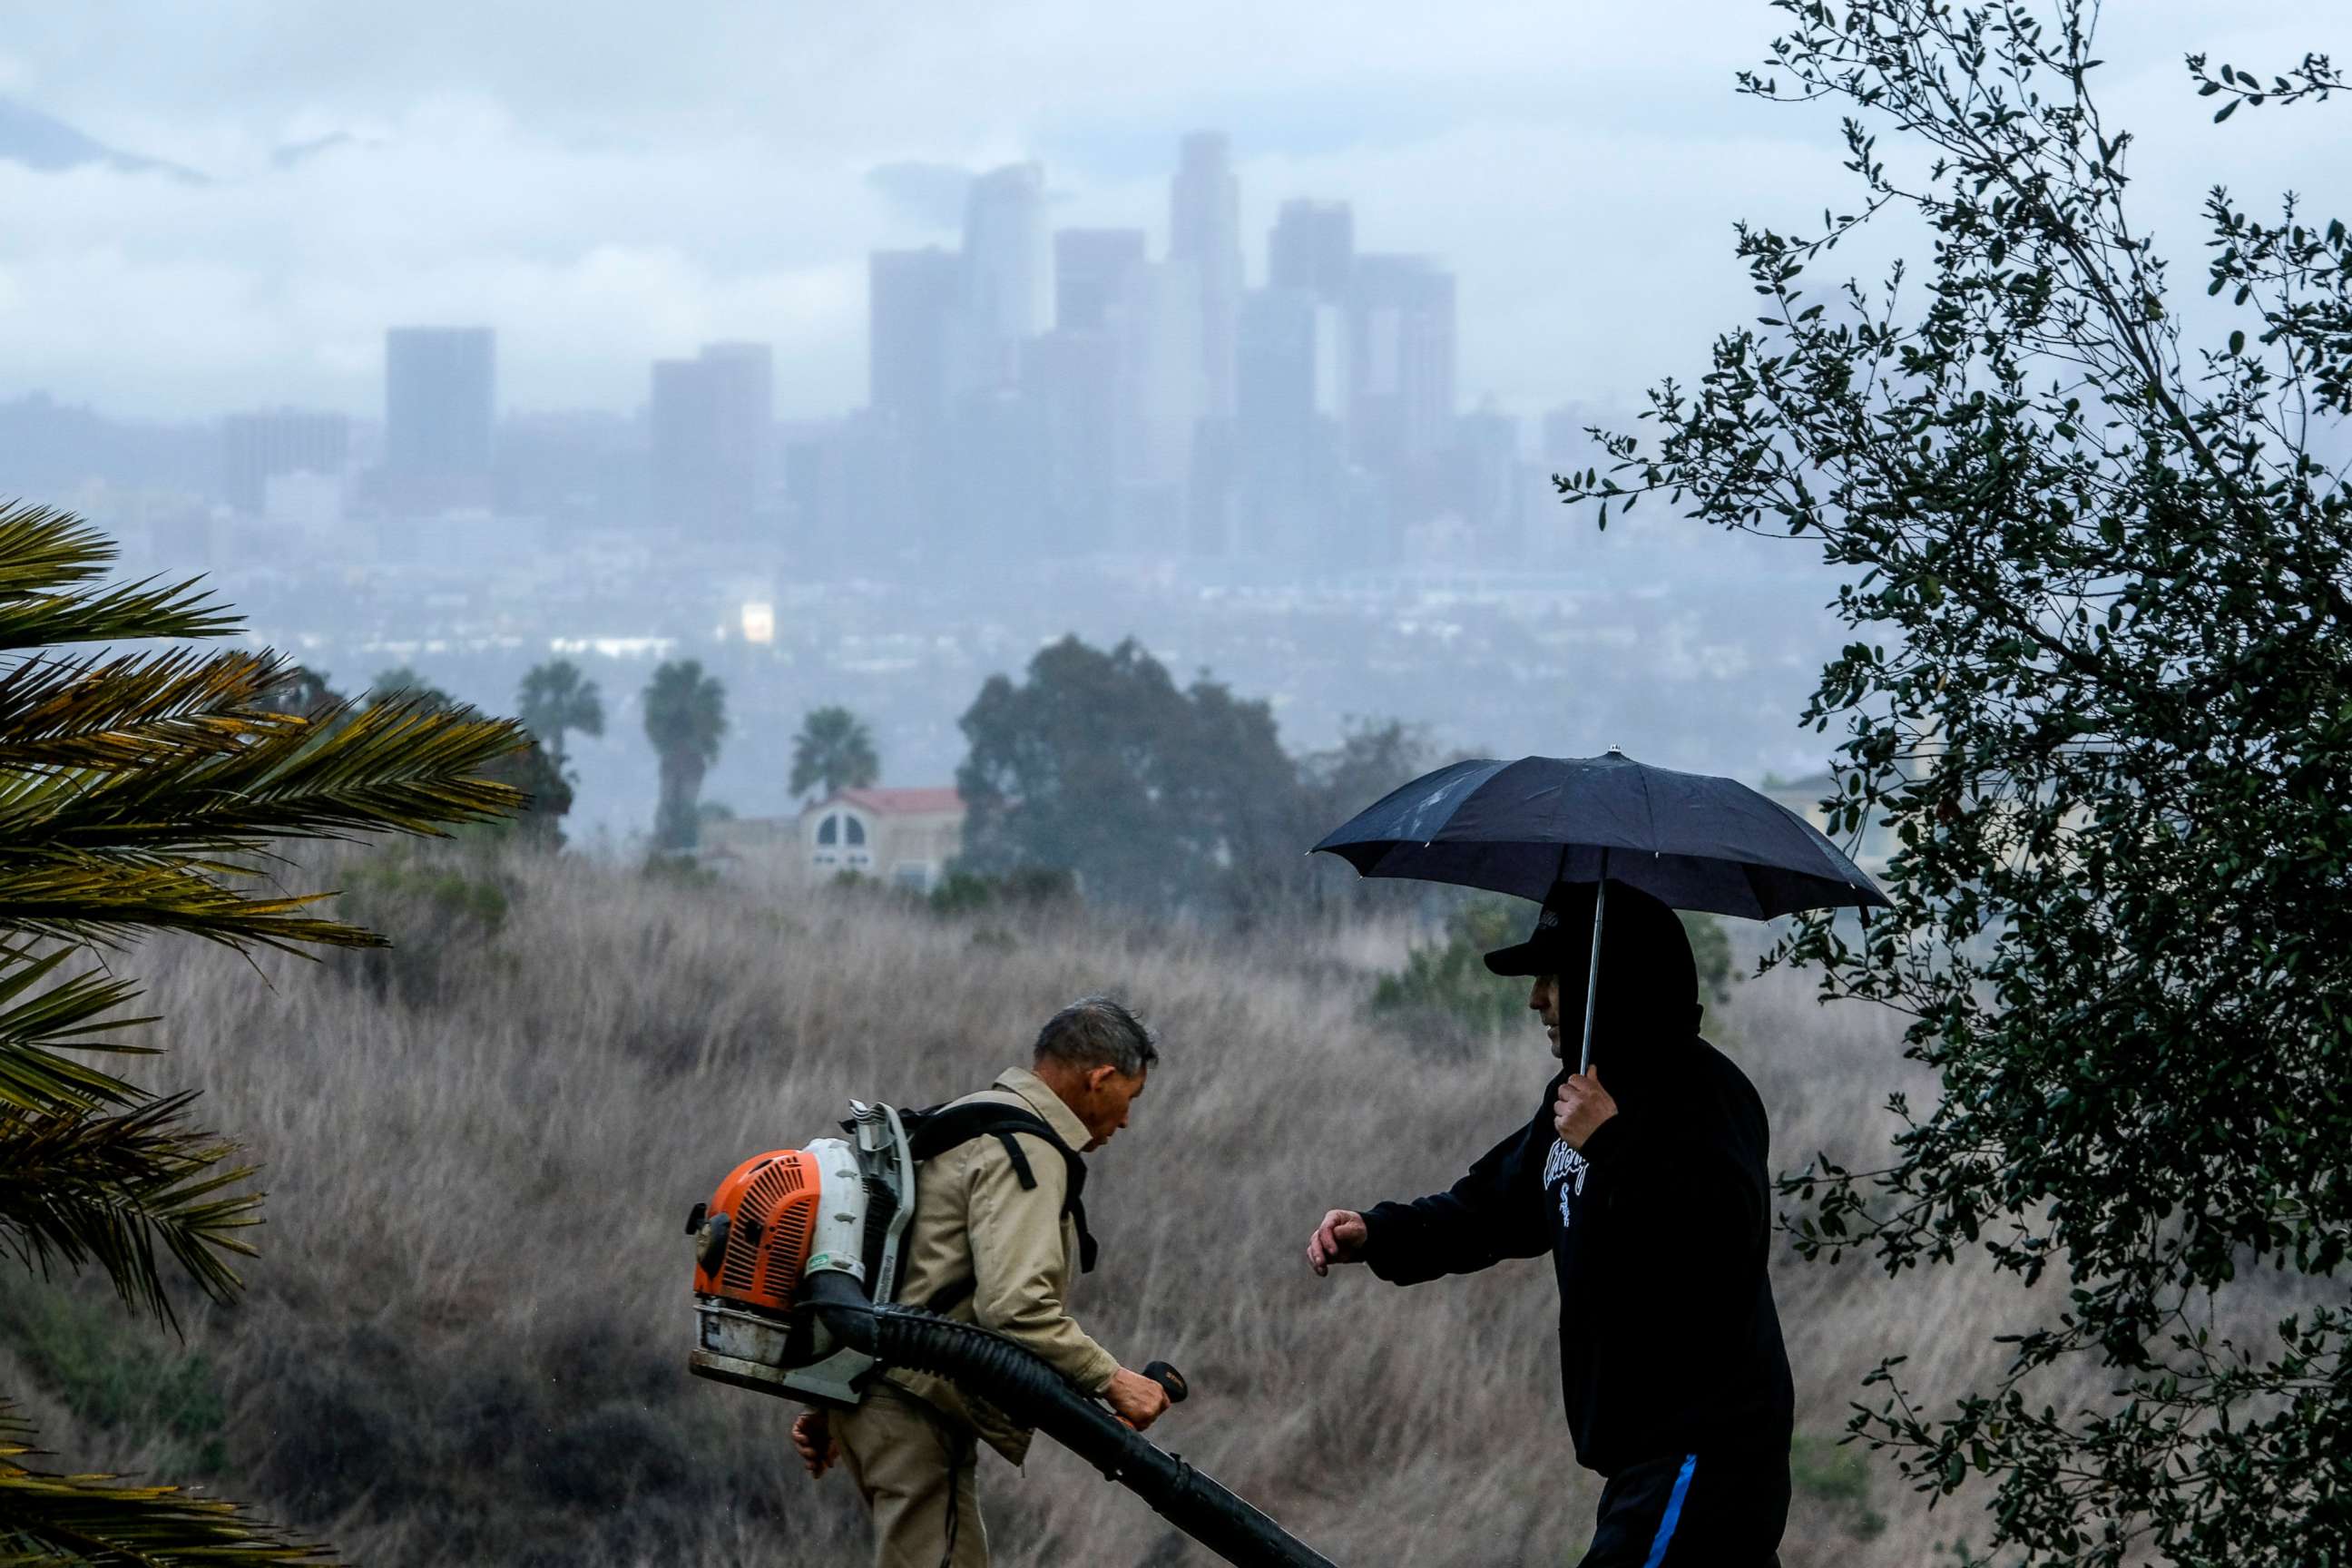 PHOTO: A man with an umbrella walks by a worker in Kenneth Hahn State Recreation Area as the Los Angeles skyline in background, March 10, 2021.